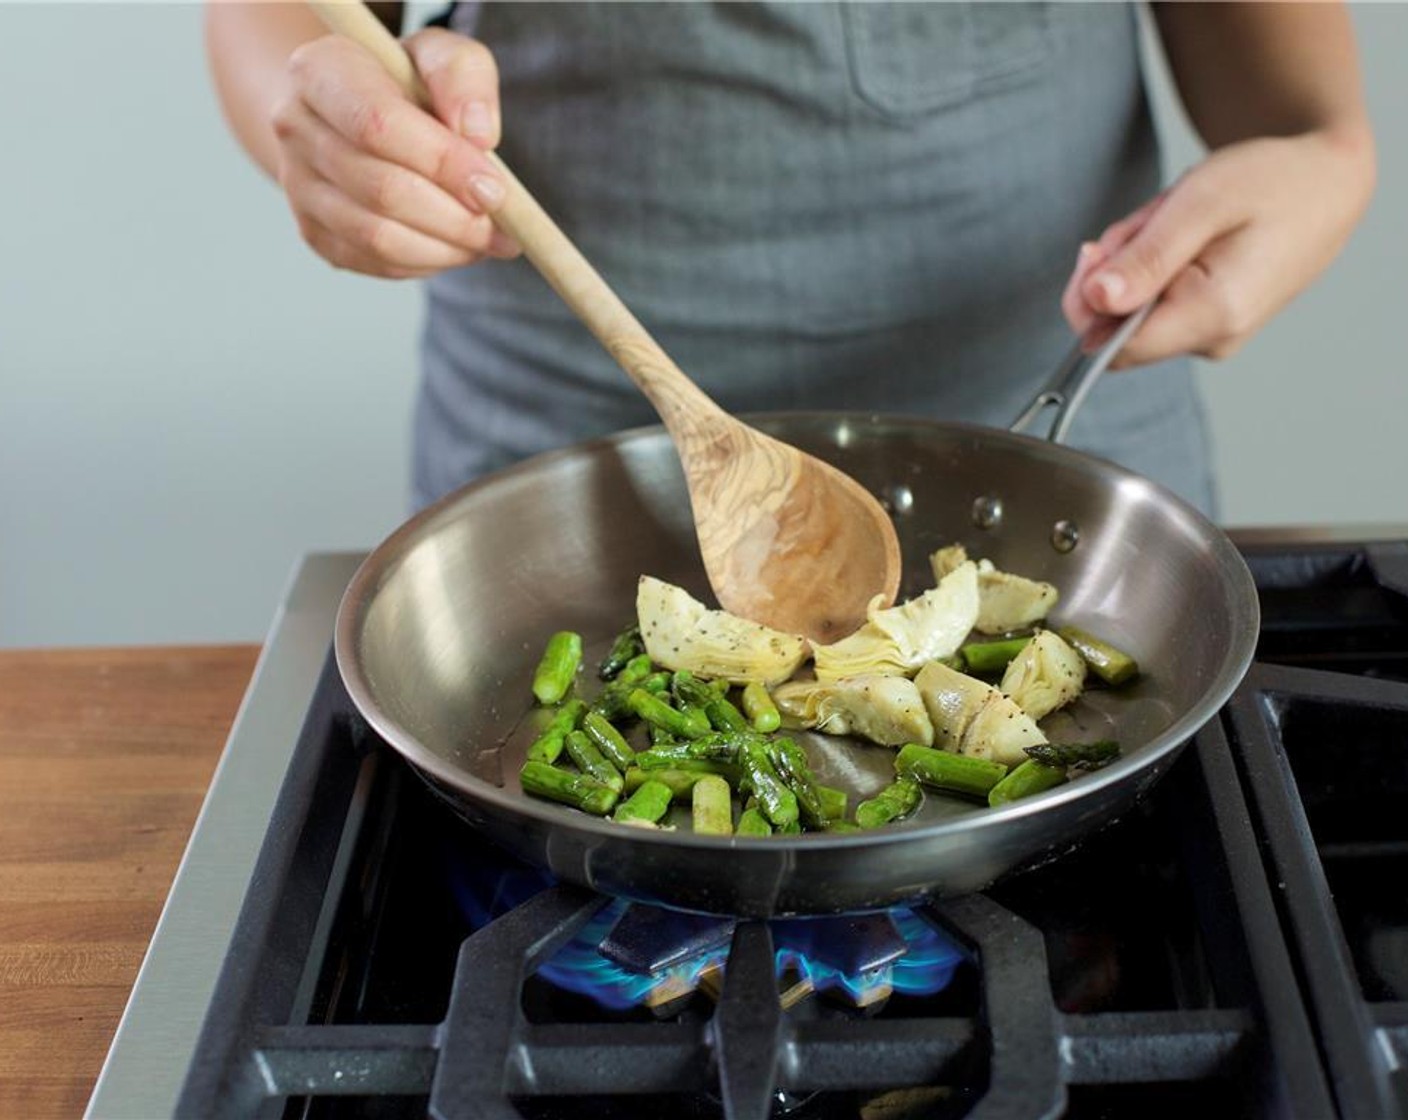 step 7 Heat a medium saute pan over high heat with one teaspoon of olive oil. Add the asparagus, artichoke hearts, Salt (1/4 tsp) and Ground Black Pepper (1/4 tsp). Toss and cook for two to three minutes. Remove from heat and set aside.